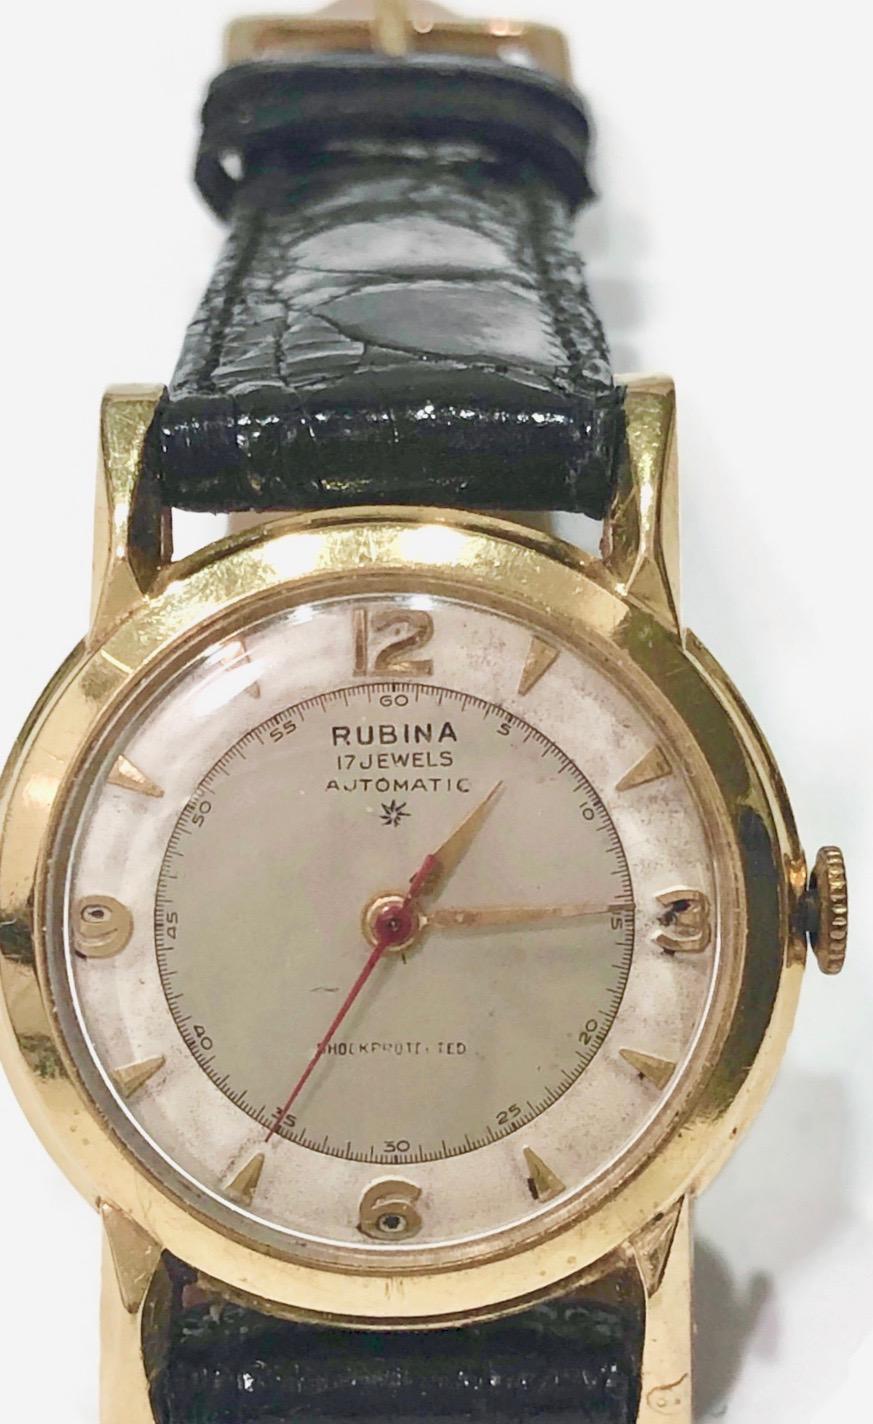 Vintage Rubina 14k yellow gold  watch with a round face and an automatic movement.  The watch is in the contemporary style with a  new black crocodile band.. 

The watch is in mint condition.  It would be categorized as a Mid-Sized watch.

Great for